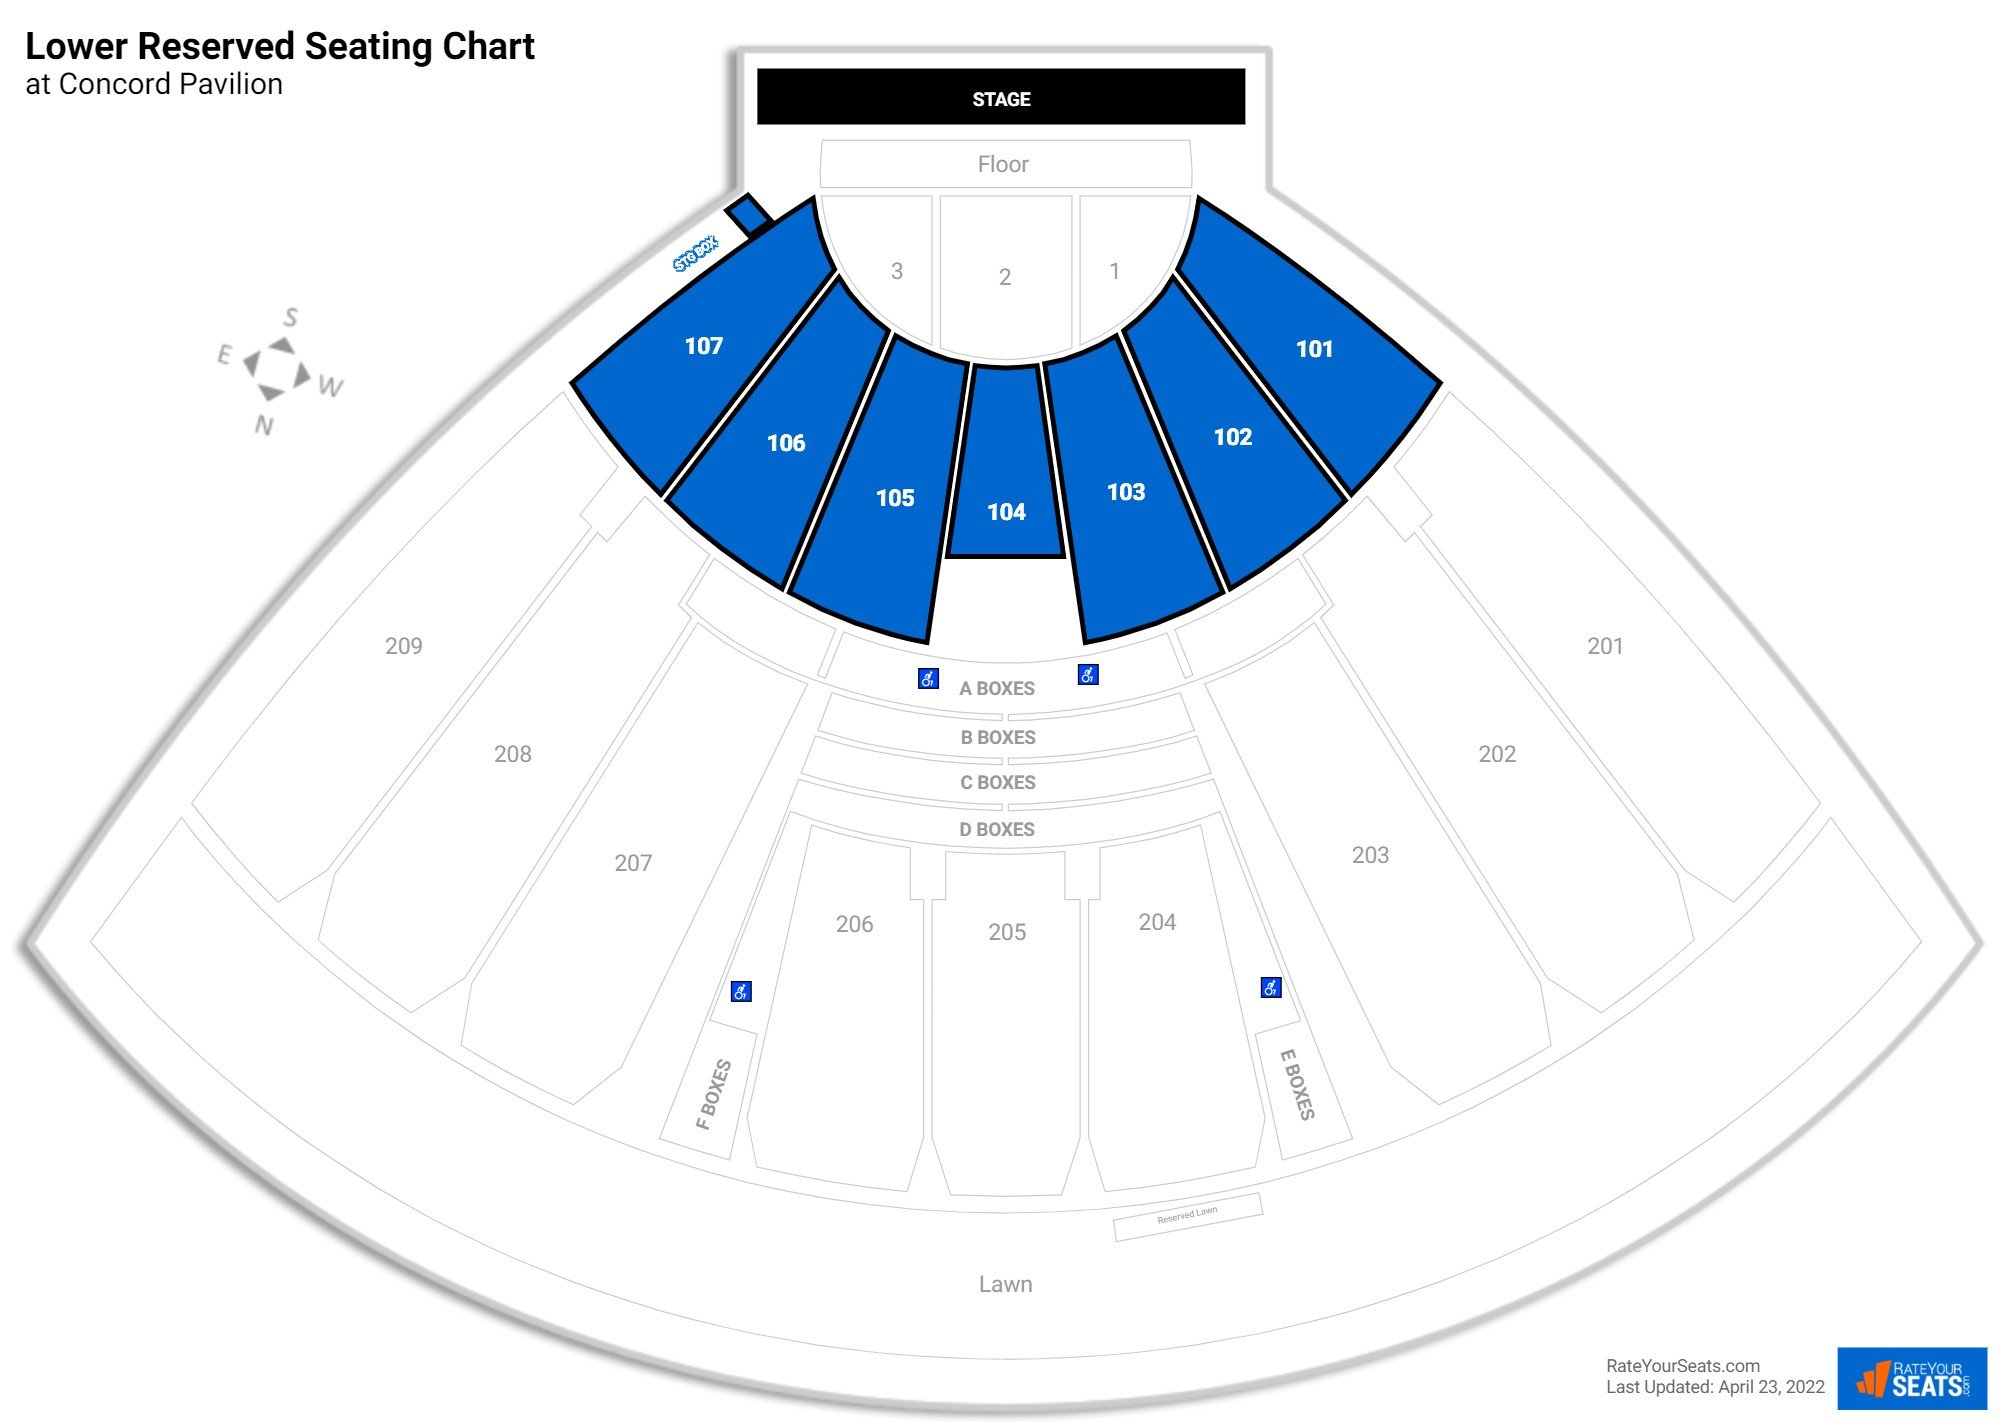 Concert Lower Reserved Seating Chart at Concord Pavilion